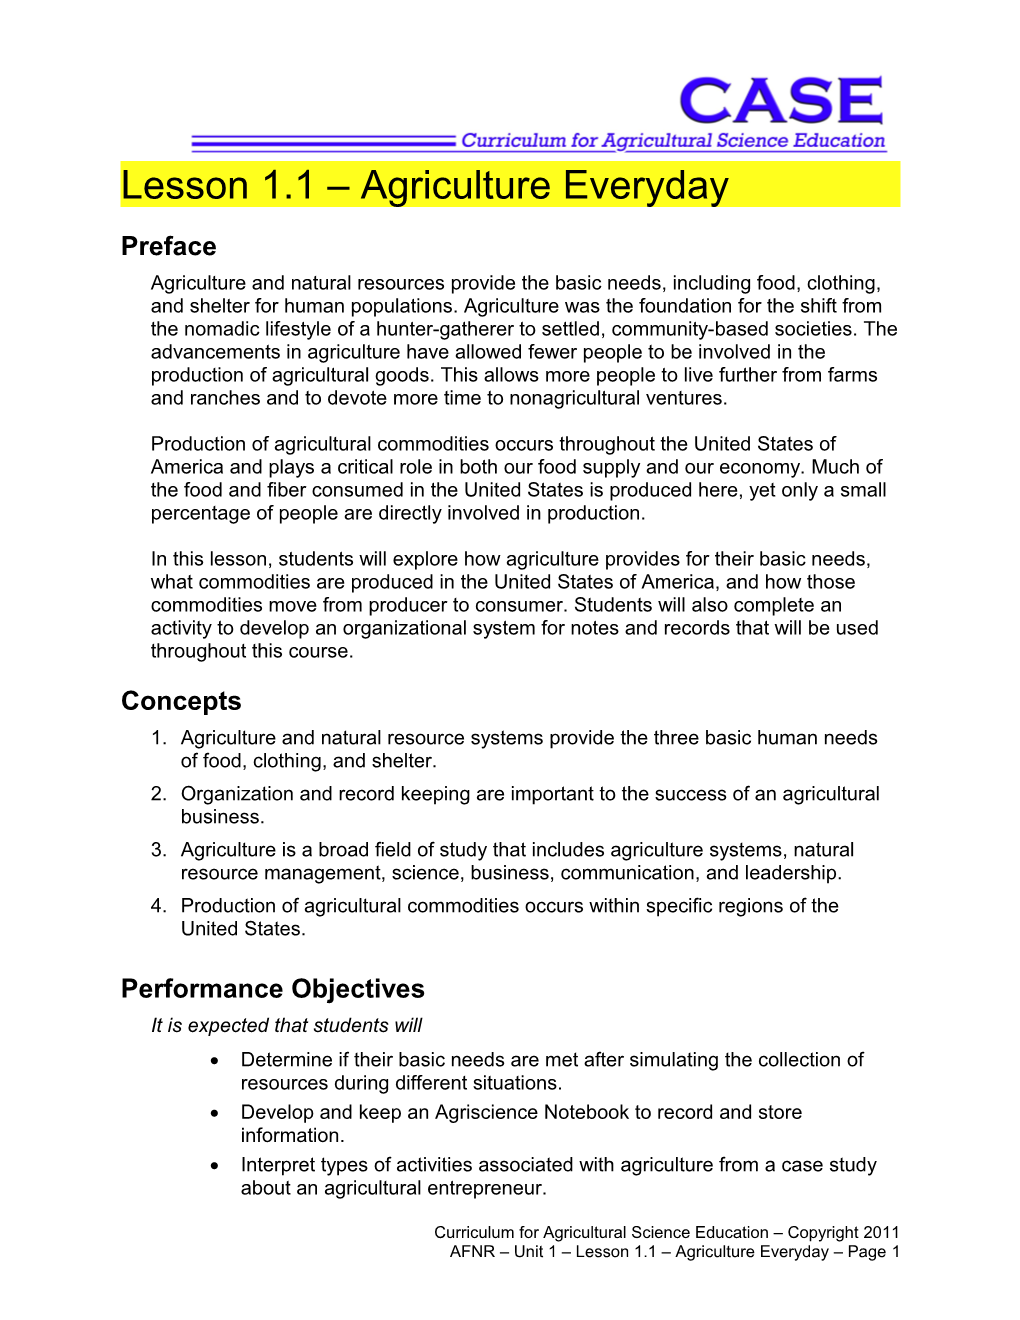 Lesson 1.1 Agriculture Everyday